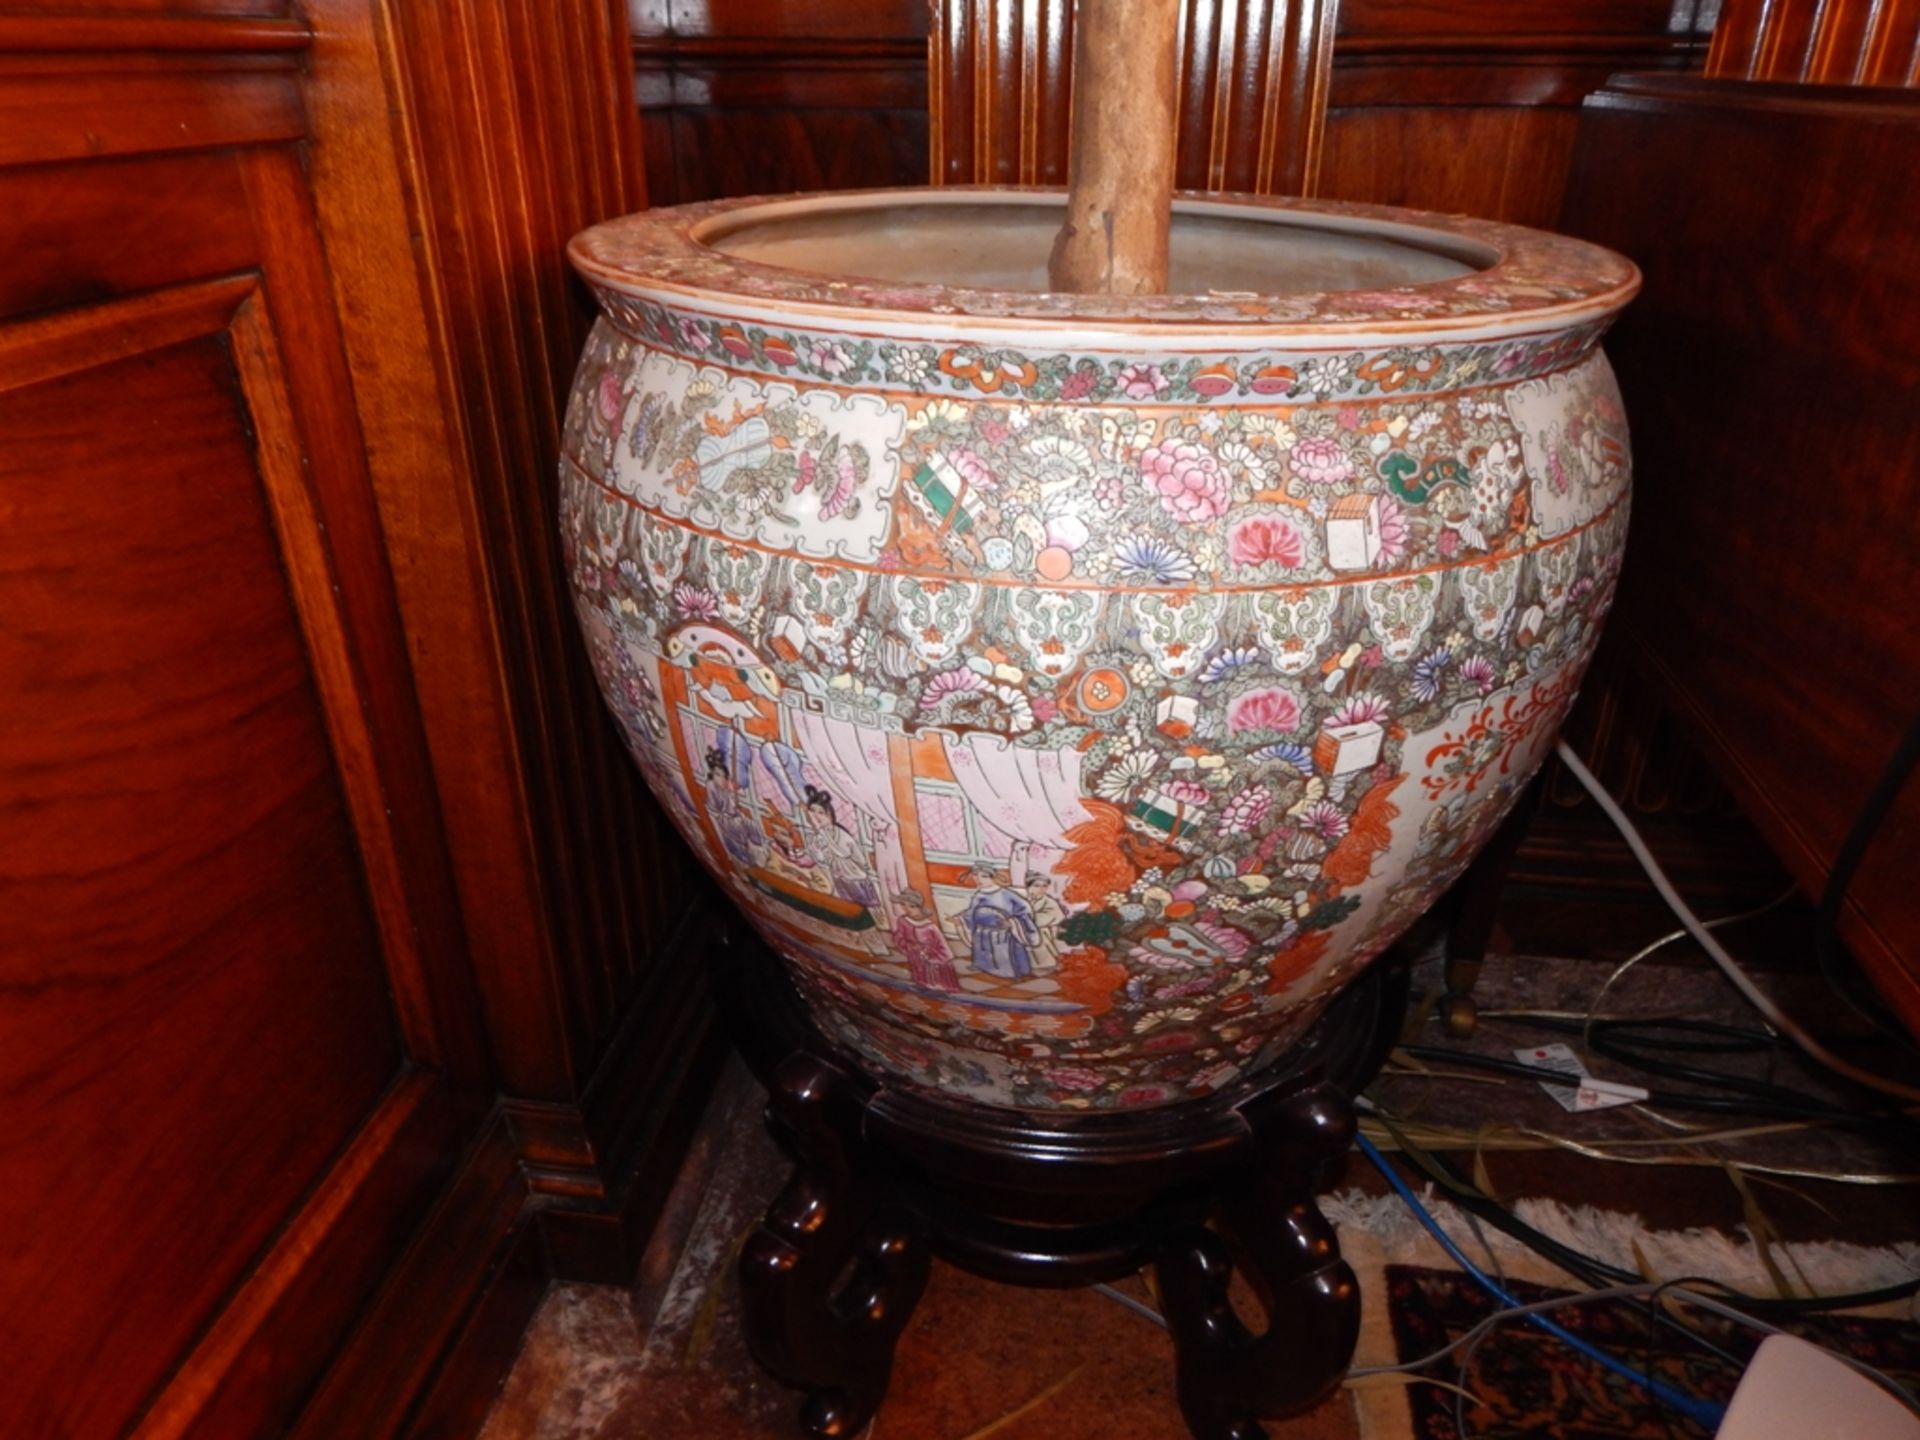 24" Oriental Jardiniere with interior depiction of Koi Fish - Image 2 of 4